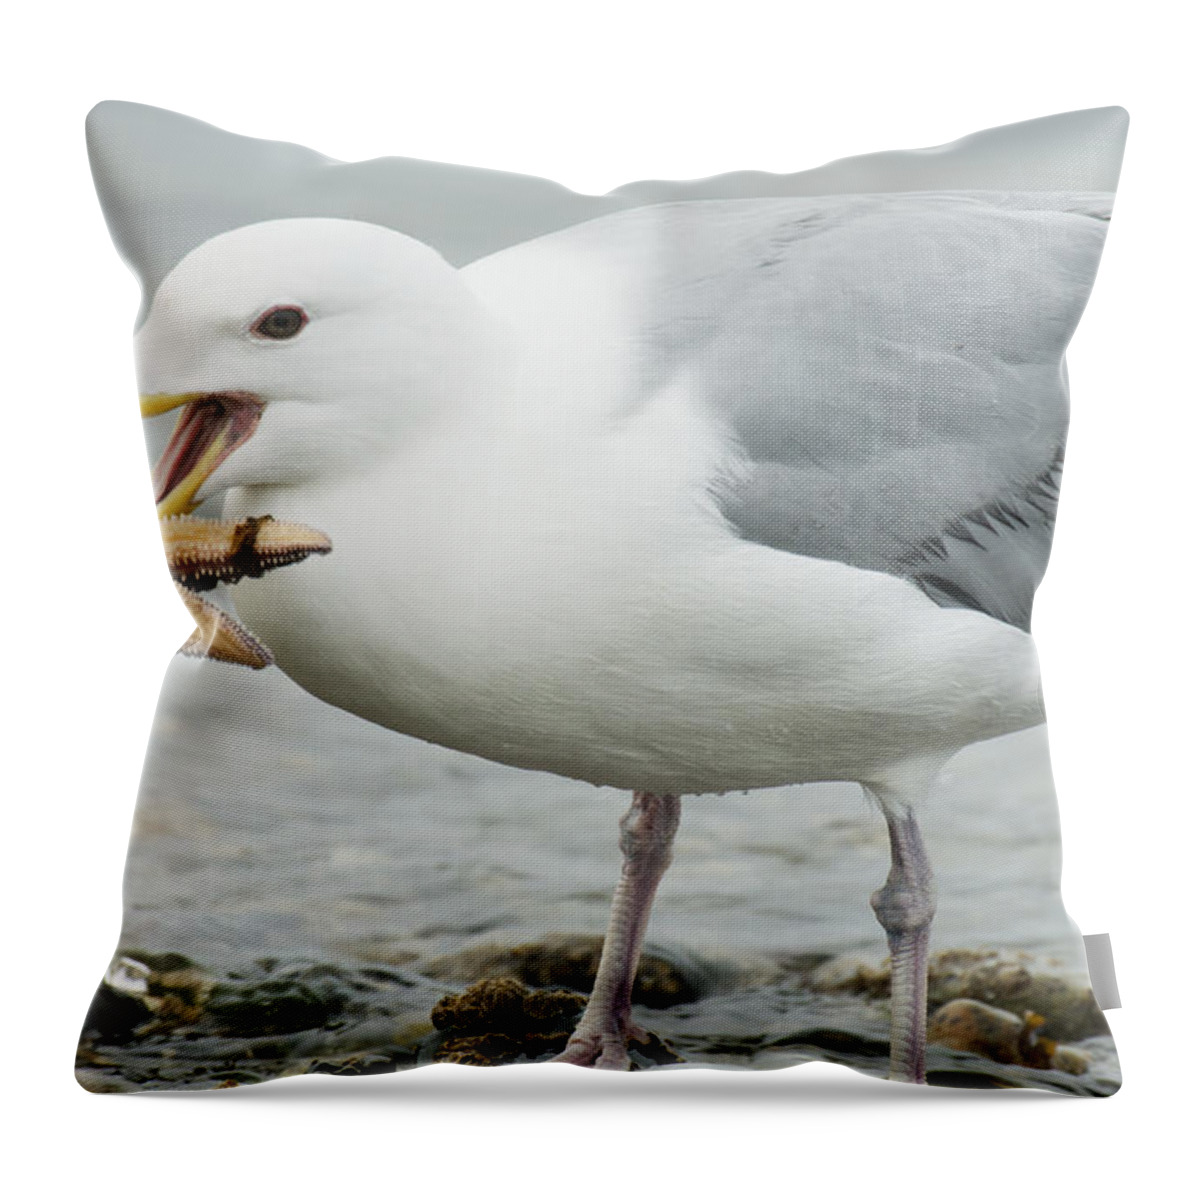 Feb0514 Throw Pillow featuring the photograph Glaucous-winged Gull Eating A Seastar by Kevin Schafer